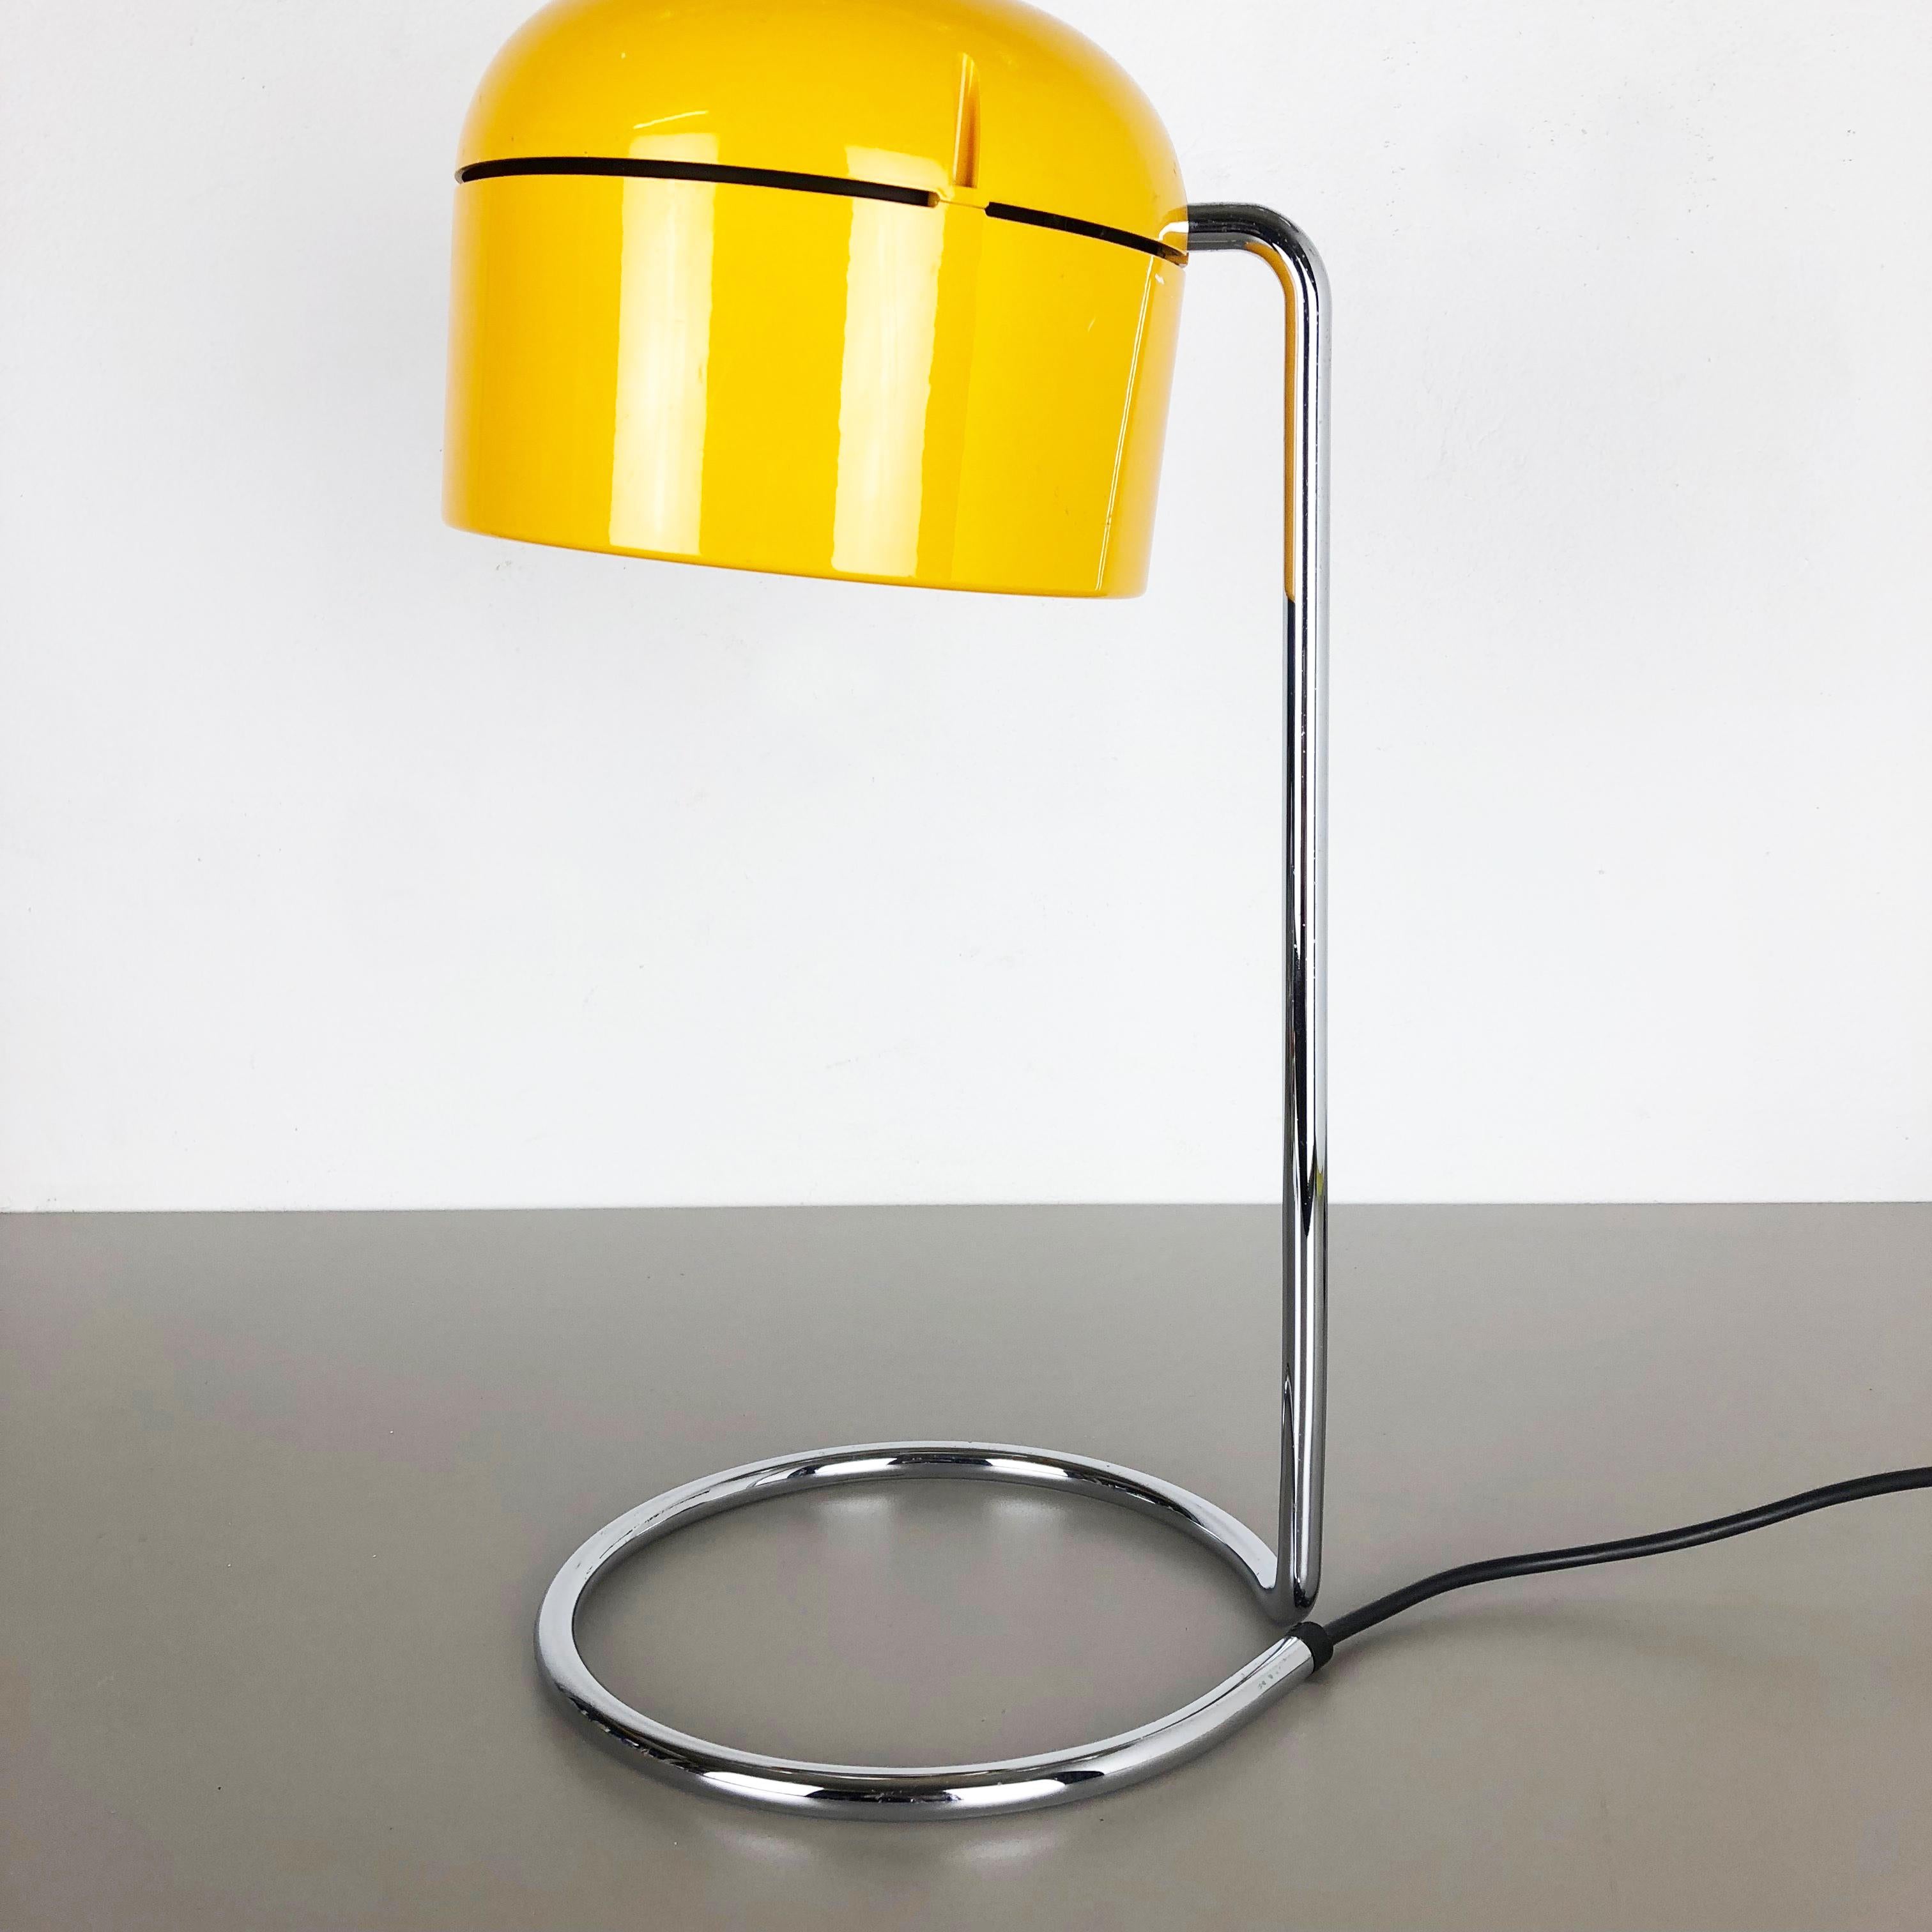 20th Century Set of 2 Yellow Pop Art Table Lights Made by Staff, Germany, 1970s